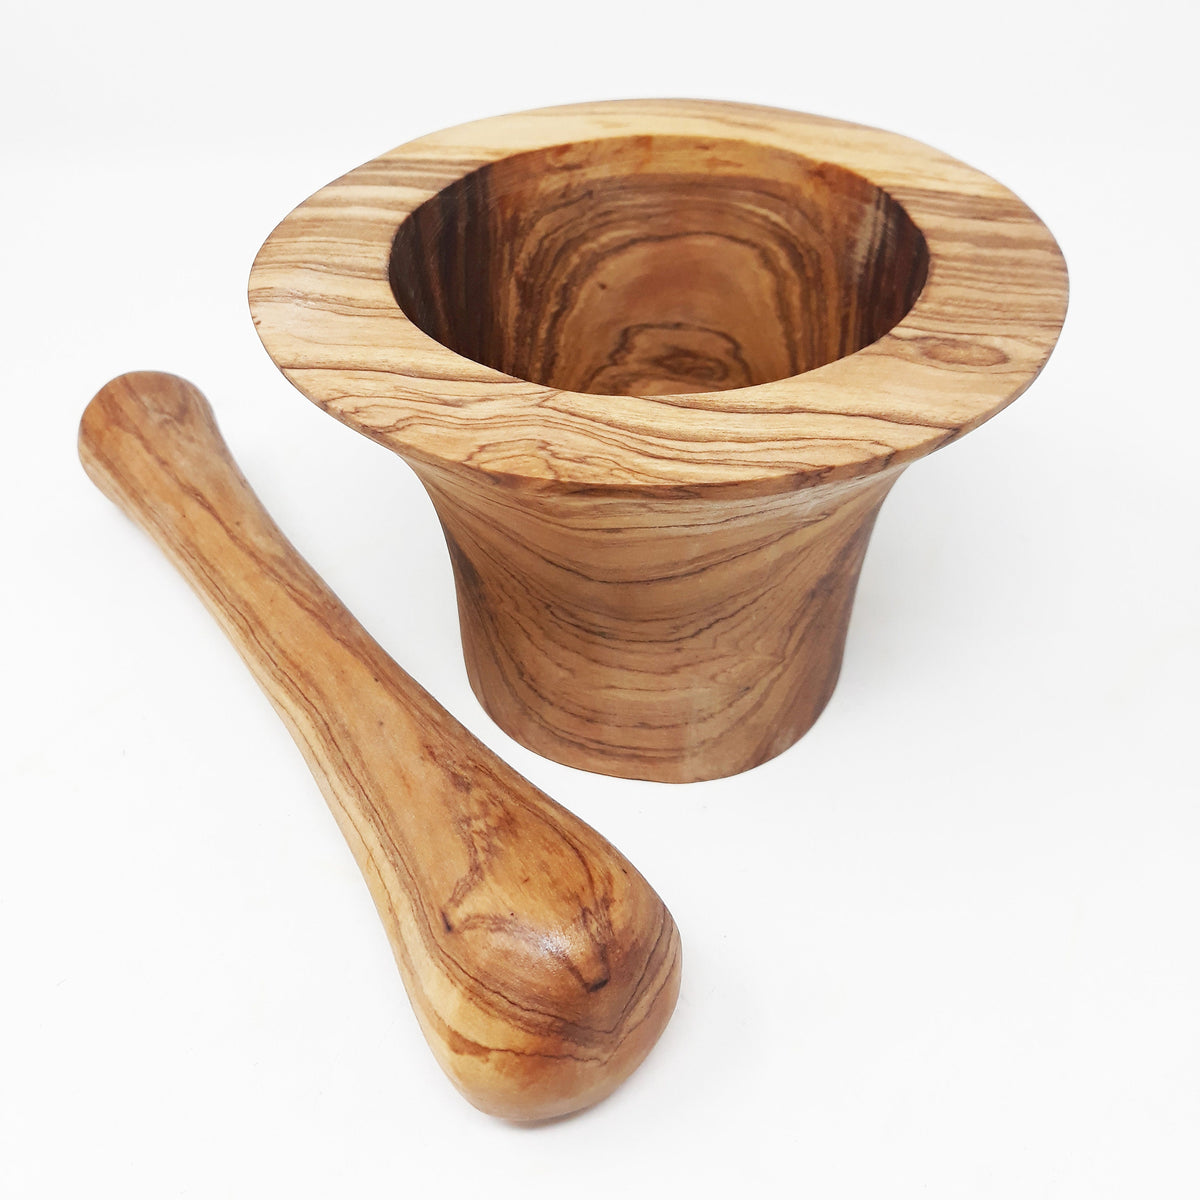 Traditional Olive Wood Pestle and Mortar, wooden Mortar &amp; Pestle, Wooden Spice Grinder, Wooden Pestle and Mortar, chef kitchen gift